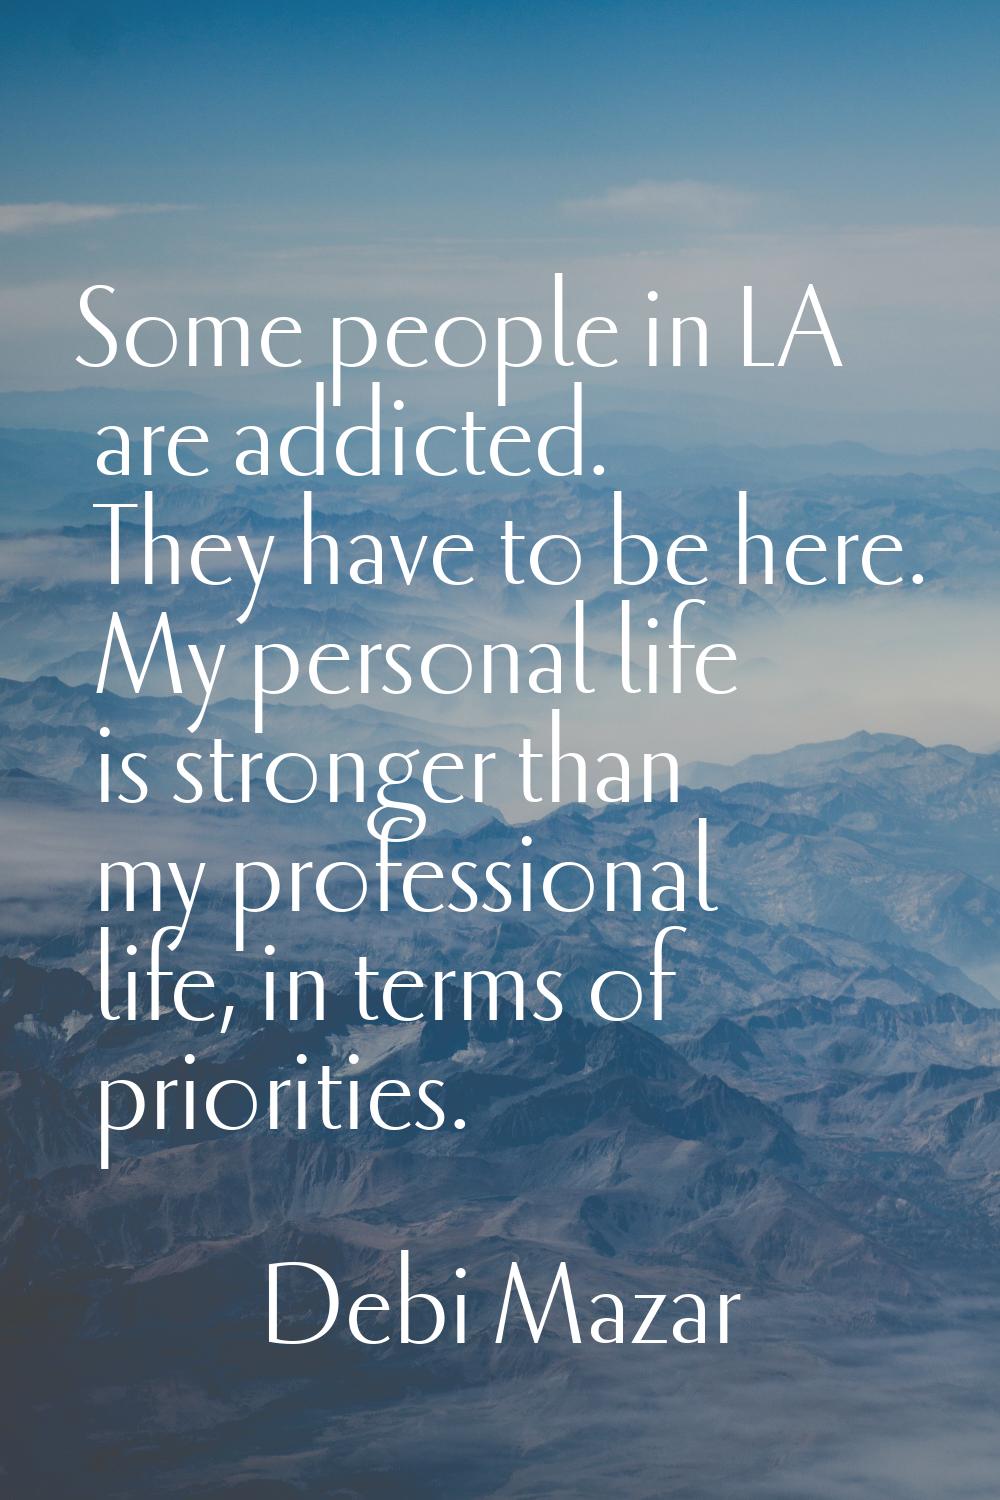 Some people in LA are addicted. They have to be here. My personal life is stronger than my professi